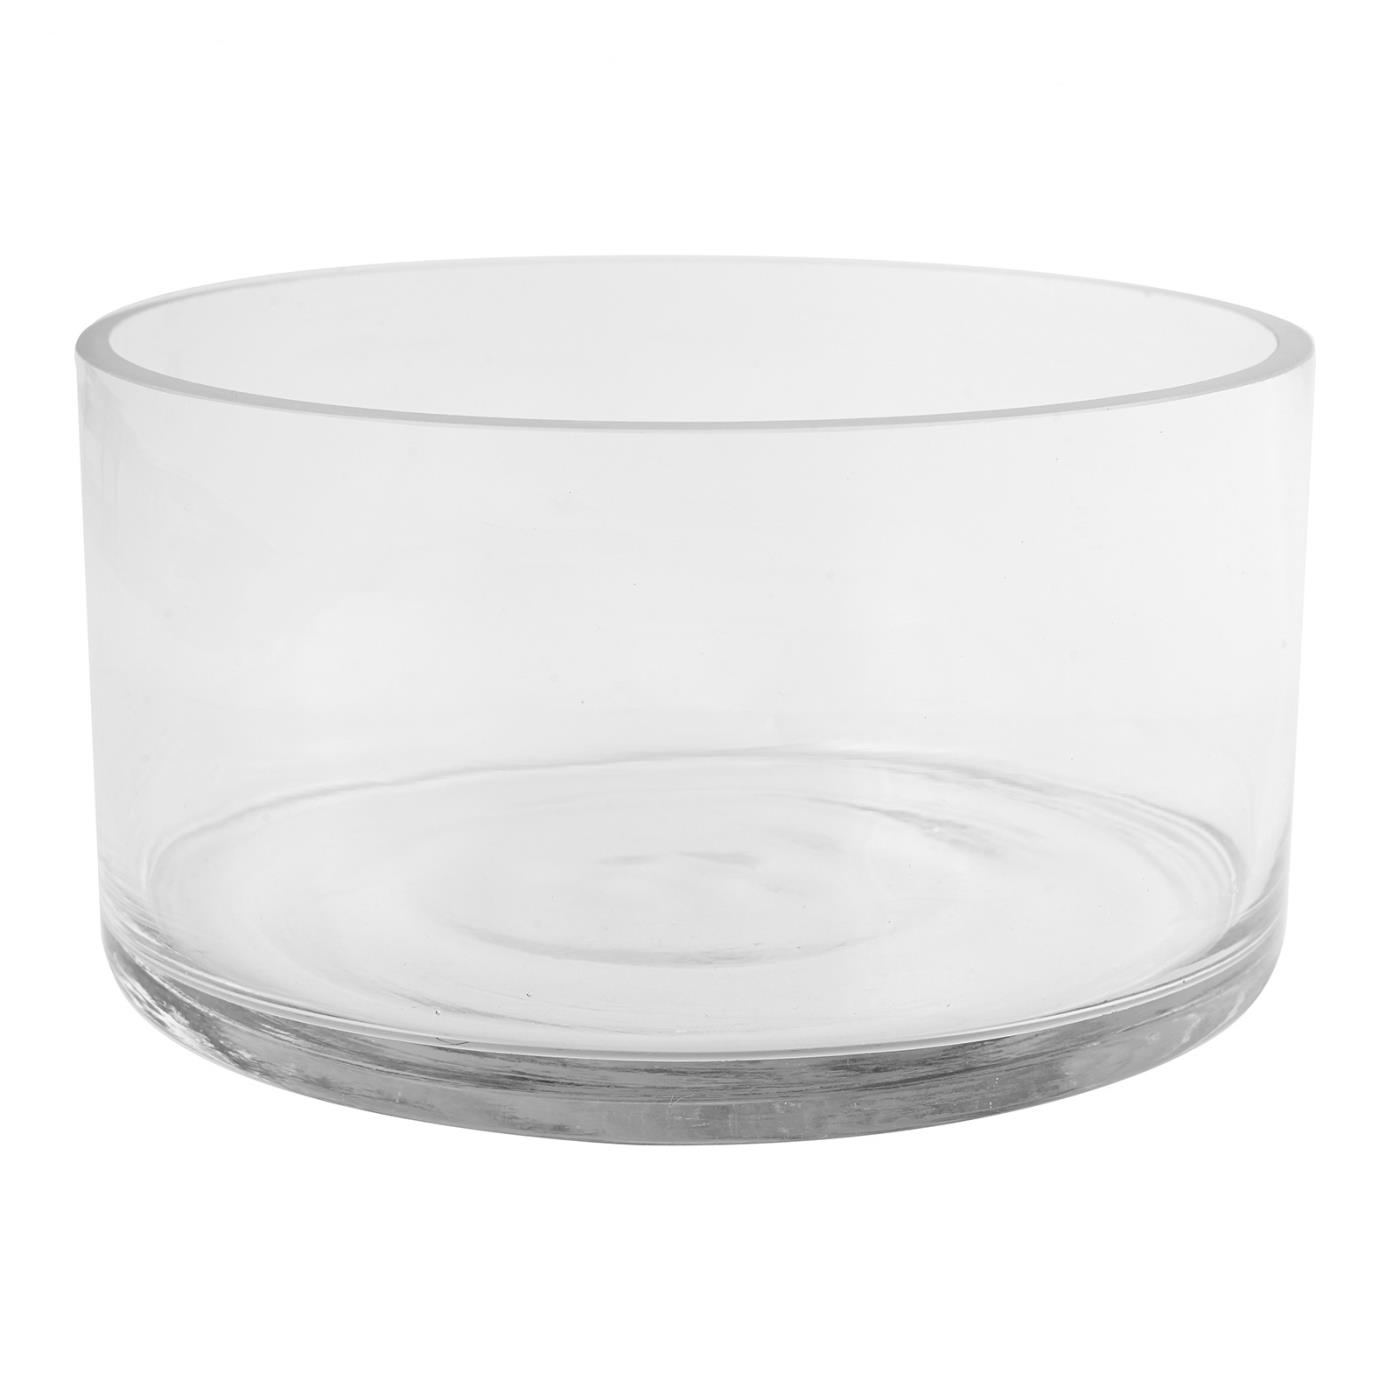 Glass Straight Sided Bowl for Rent in NYC